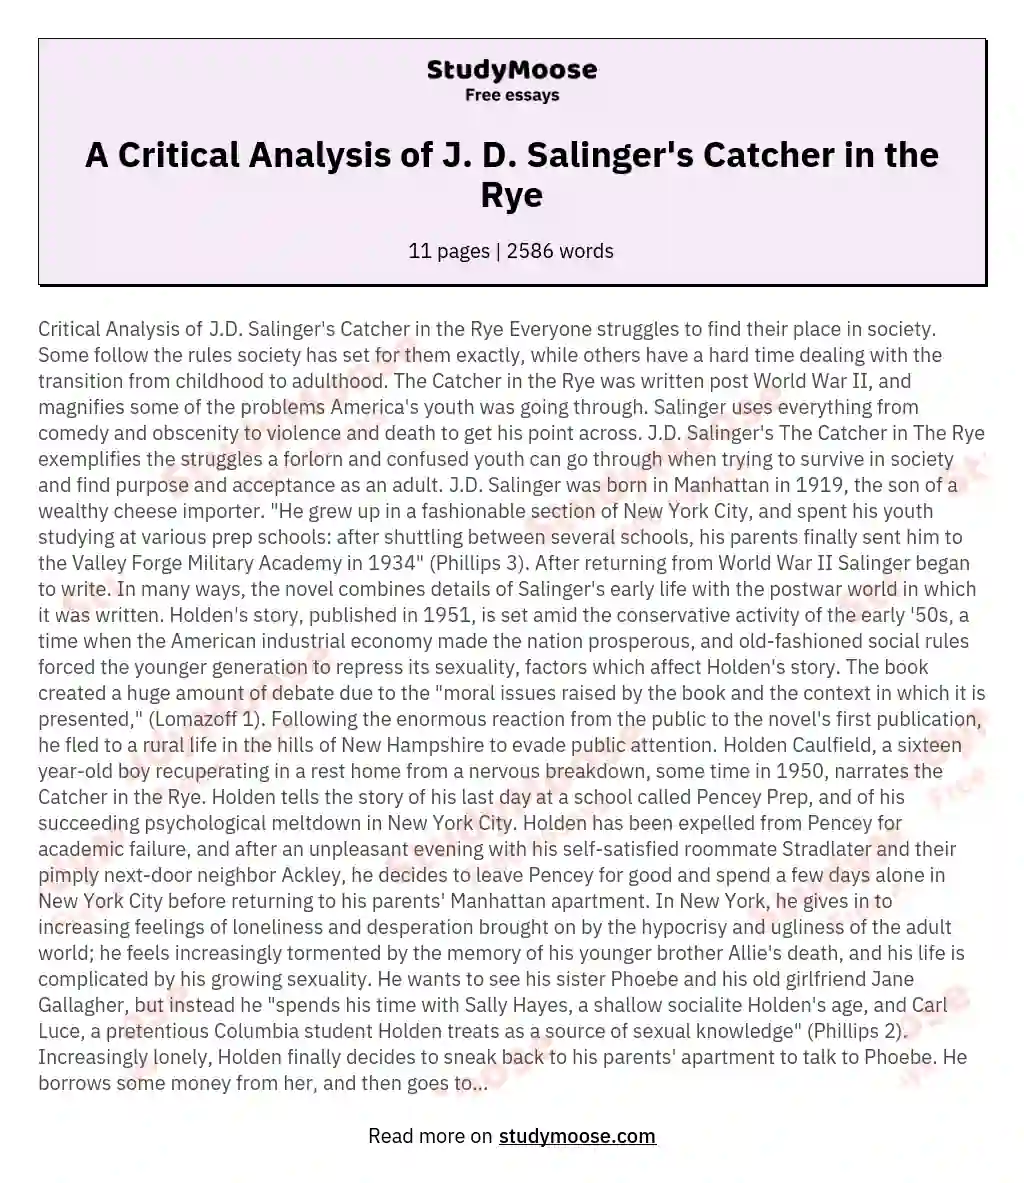 A Critical Analysis of J. D. Salinger's Catcher in the Rye